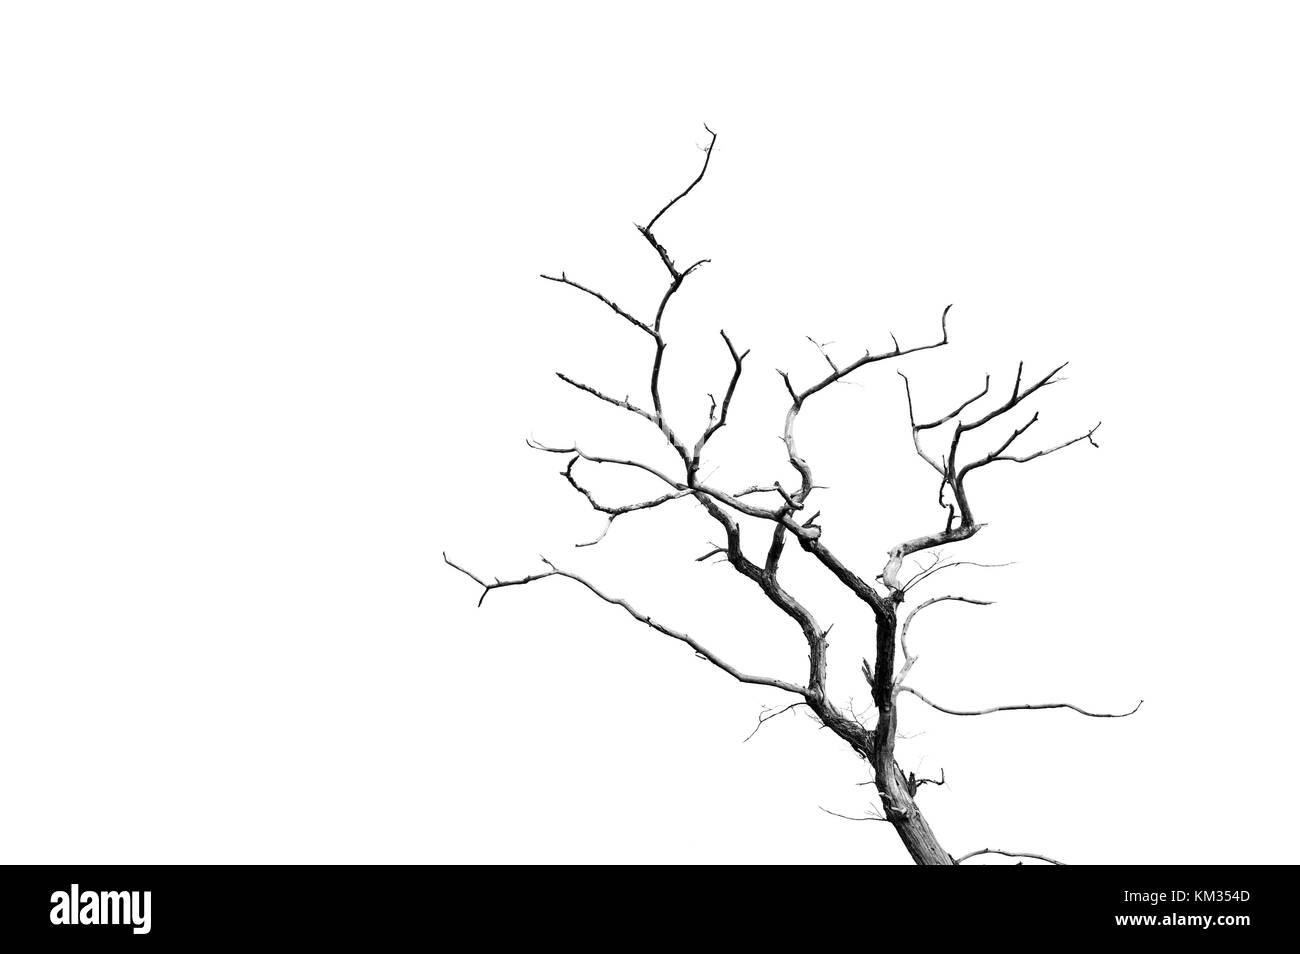 Branches silhouette, old tree, abstract background Stock Photo